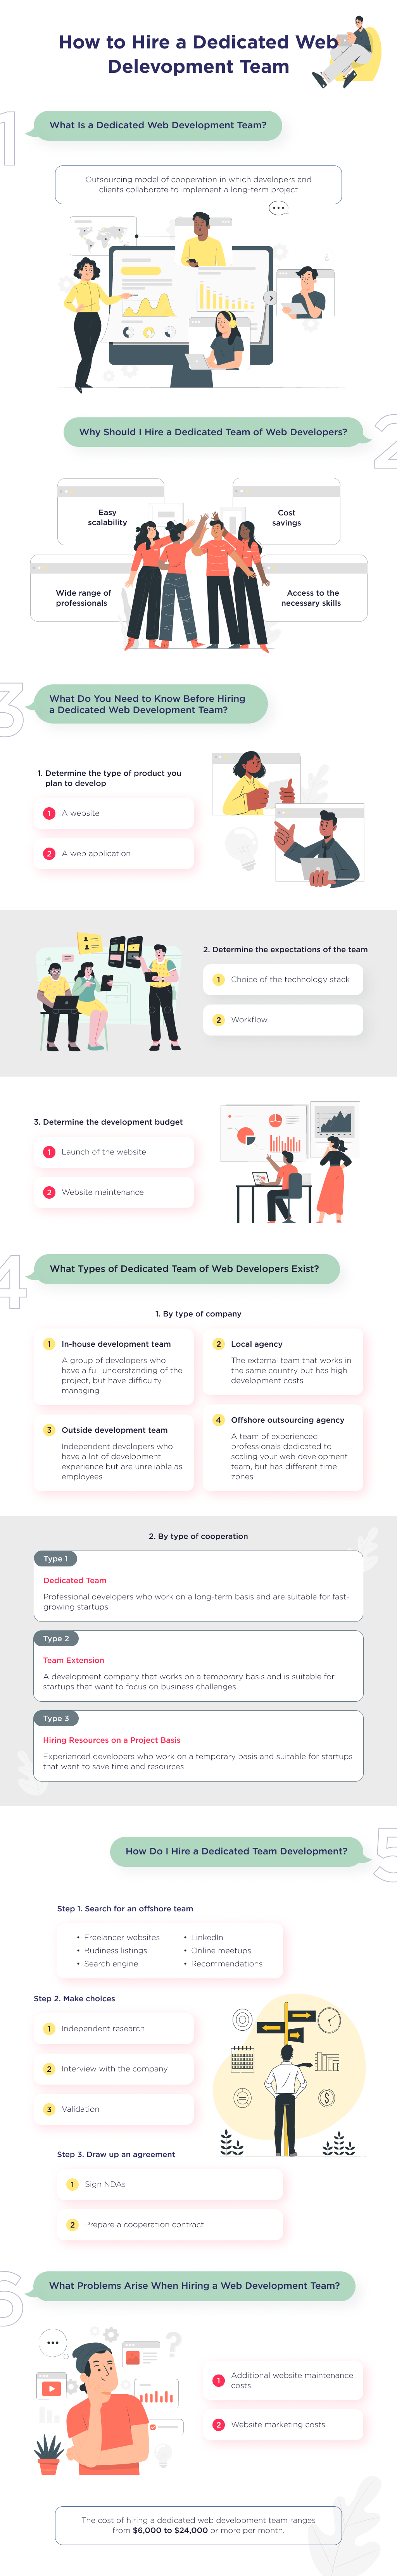 This infographic shows the step-by-step process of hiring a dedicated web development team 